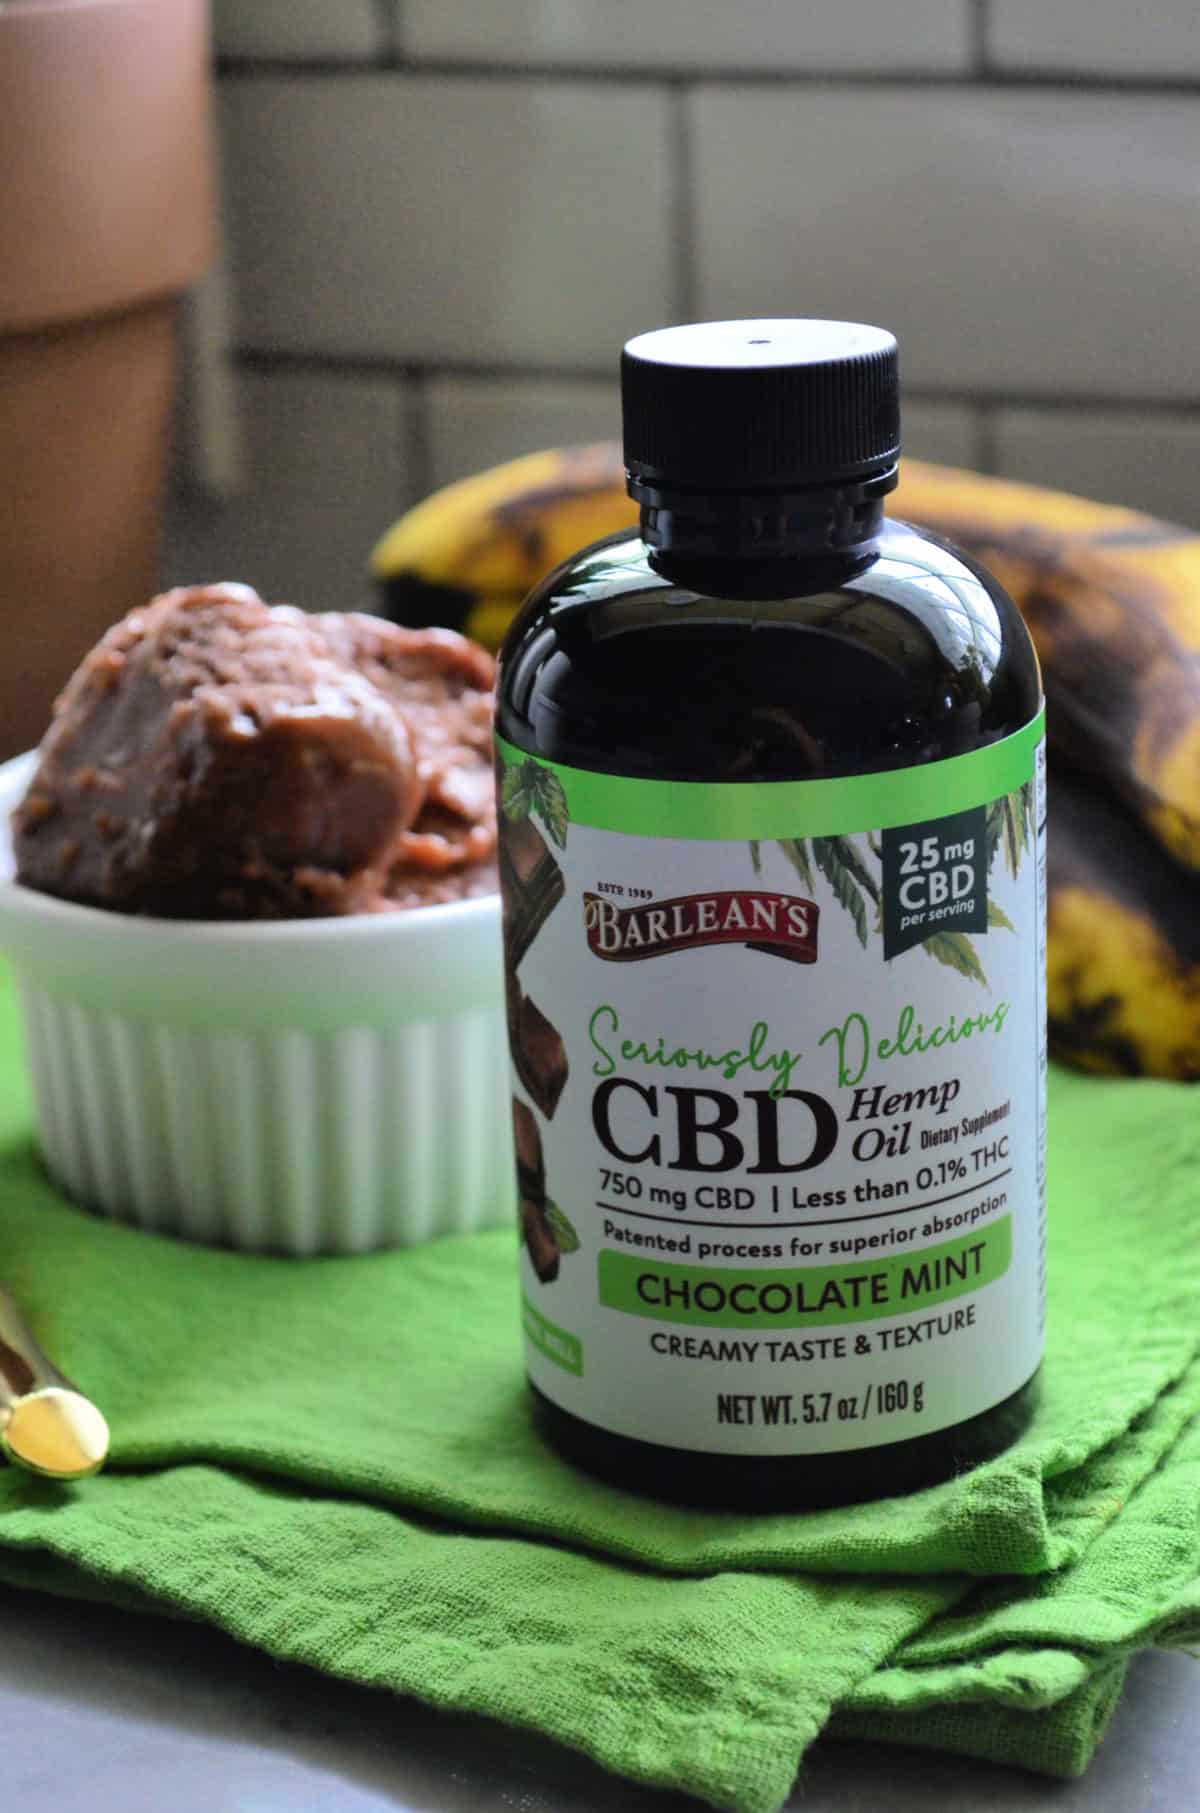 Barleans Seriously Delicious Chocolate Mint CBD 750 MG bottle of Hemp Oil.